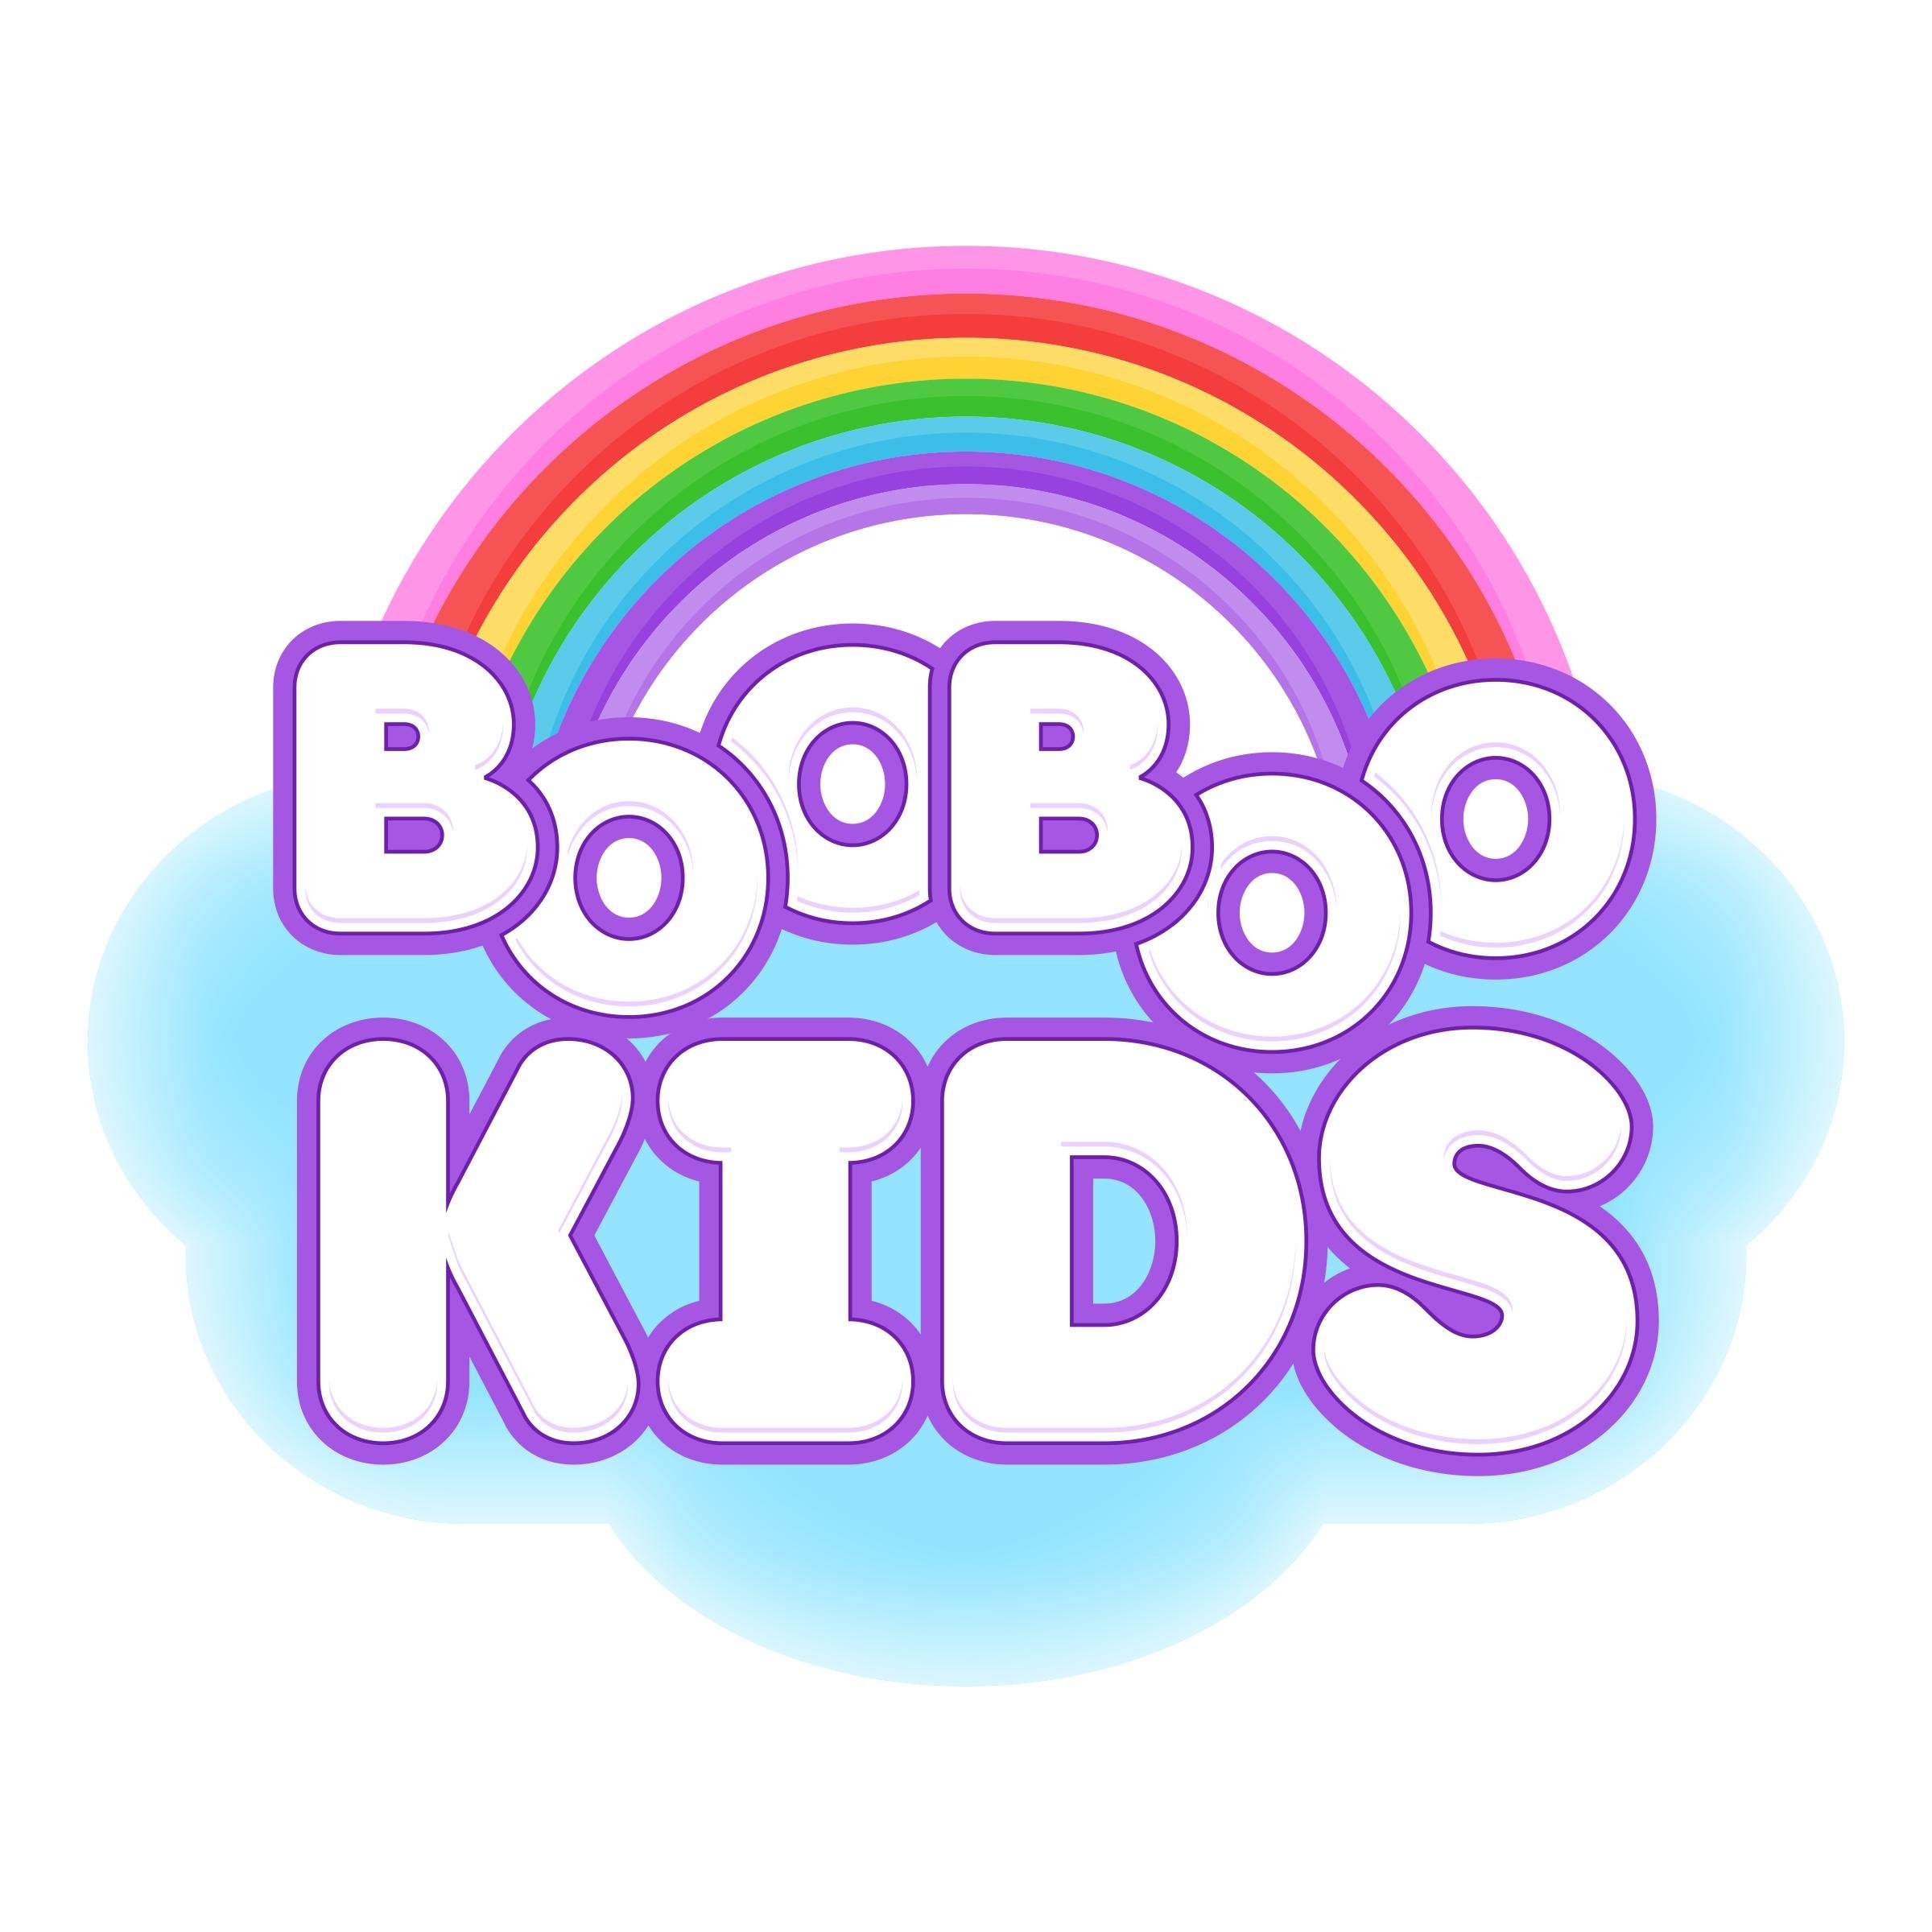 Welcome to Boo Boo Kids TV. This is a safe and kid friendly toy learning channel with education videos for kids to watch.